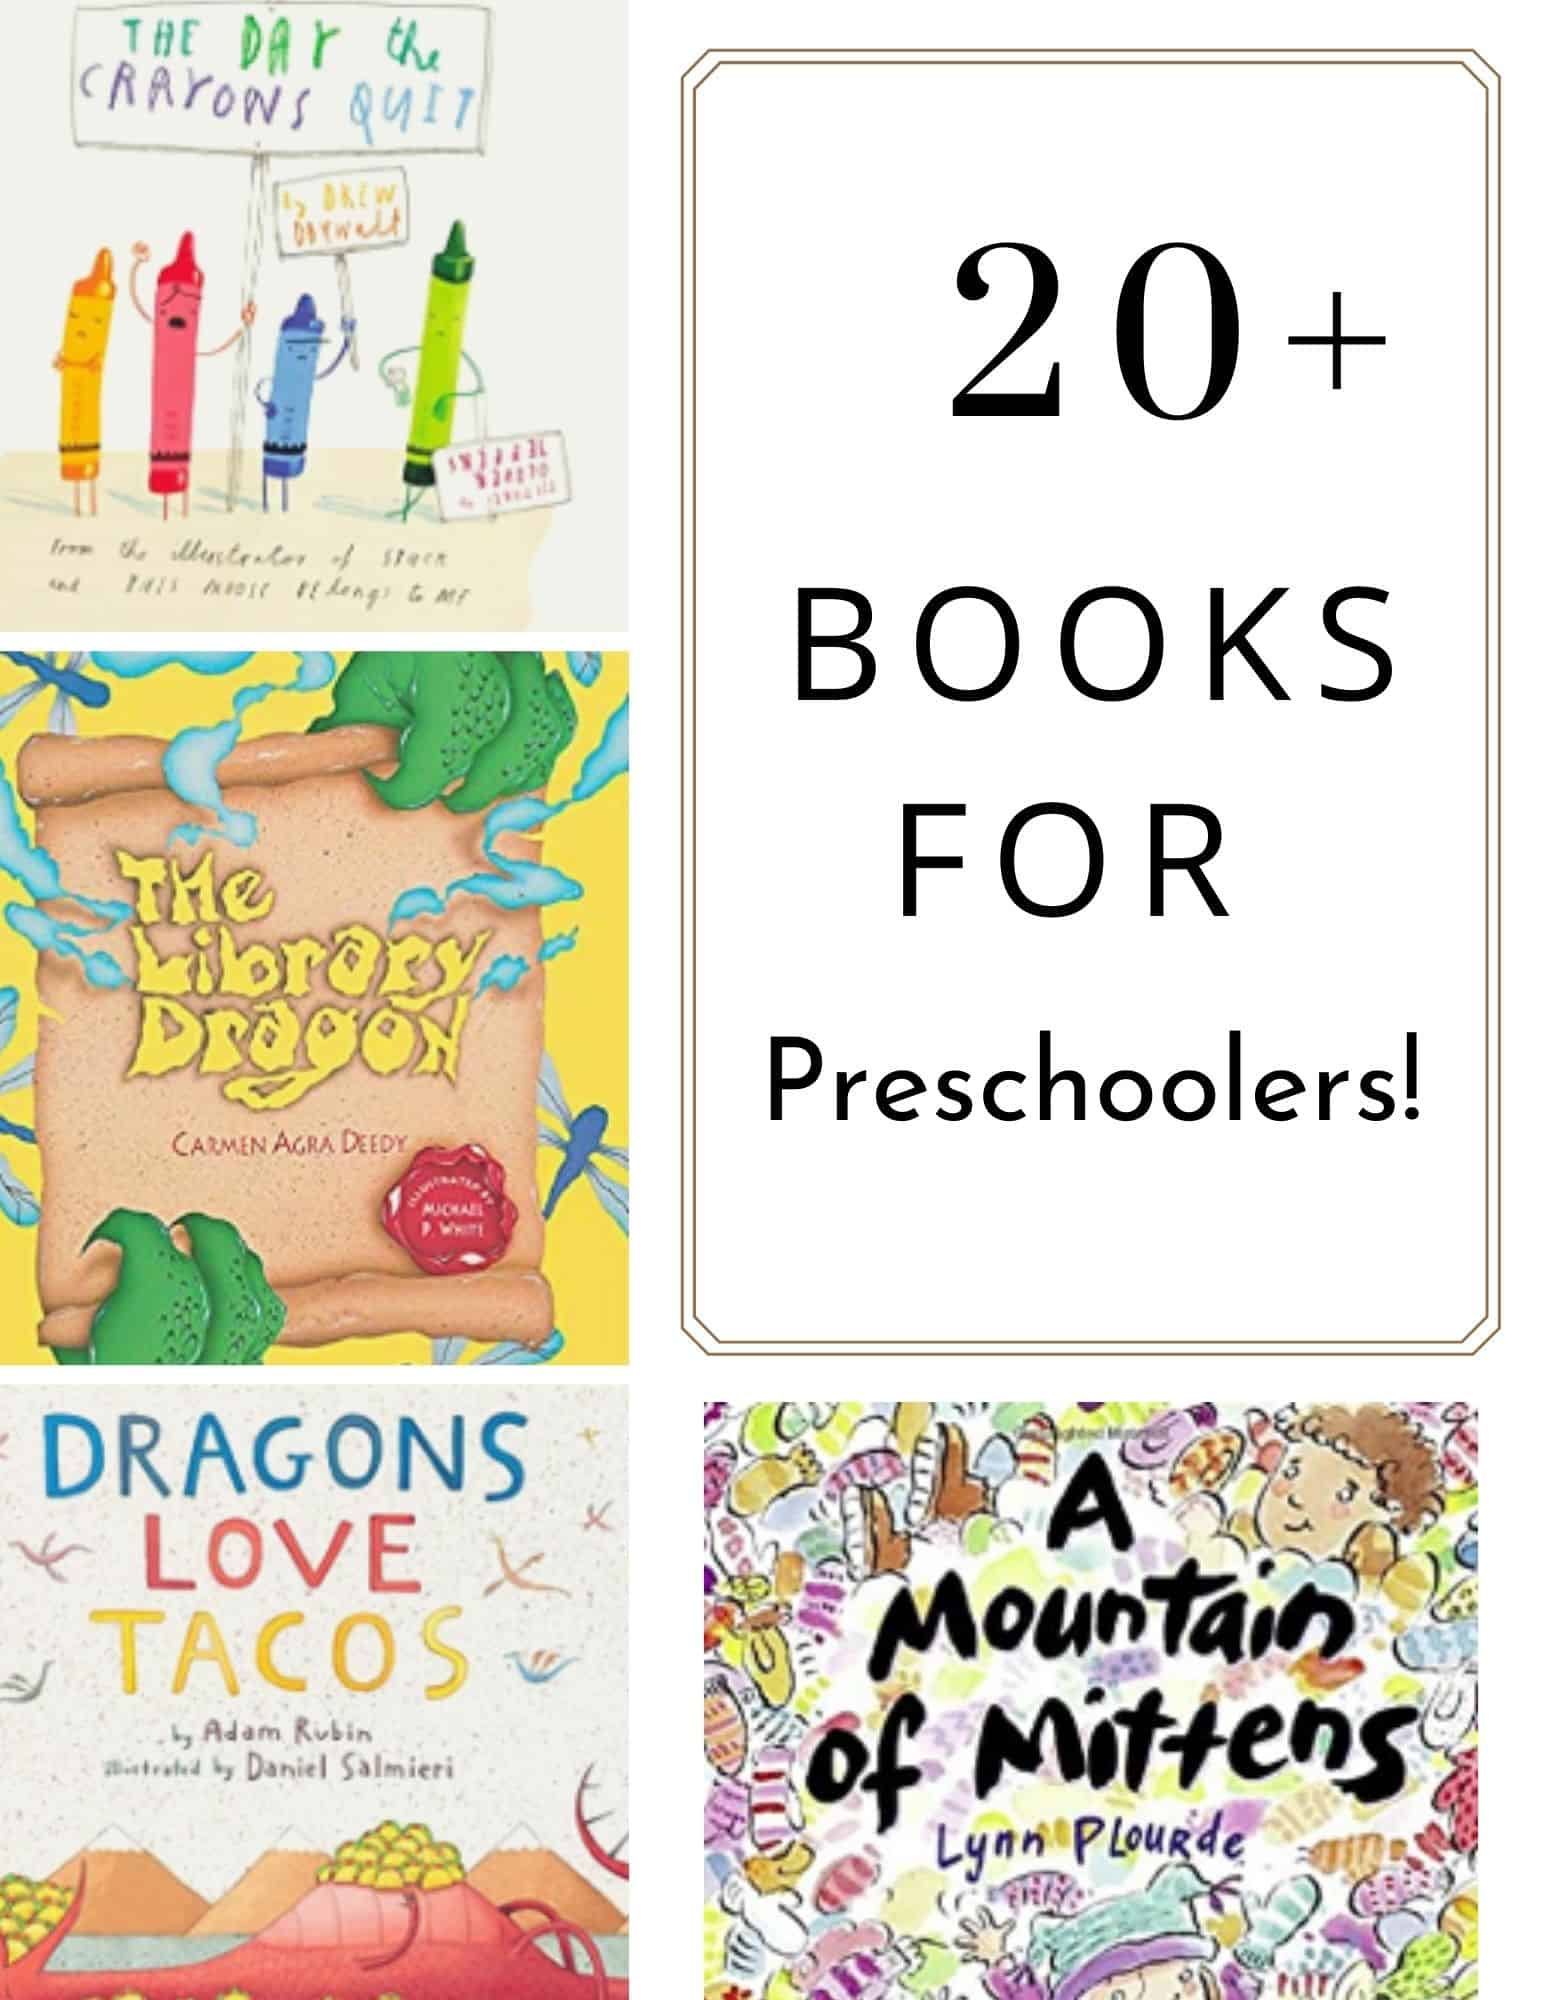 Buying books for preschoolers can be easy with these fun books for early readers. Includes over 20 books preschoolers are sure to love! Perfect for read-aloud or family reading time.